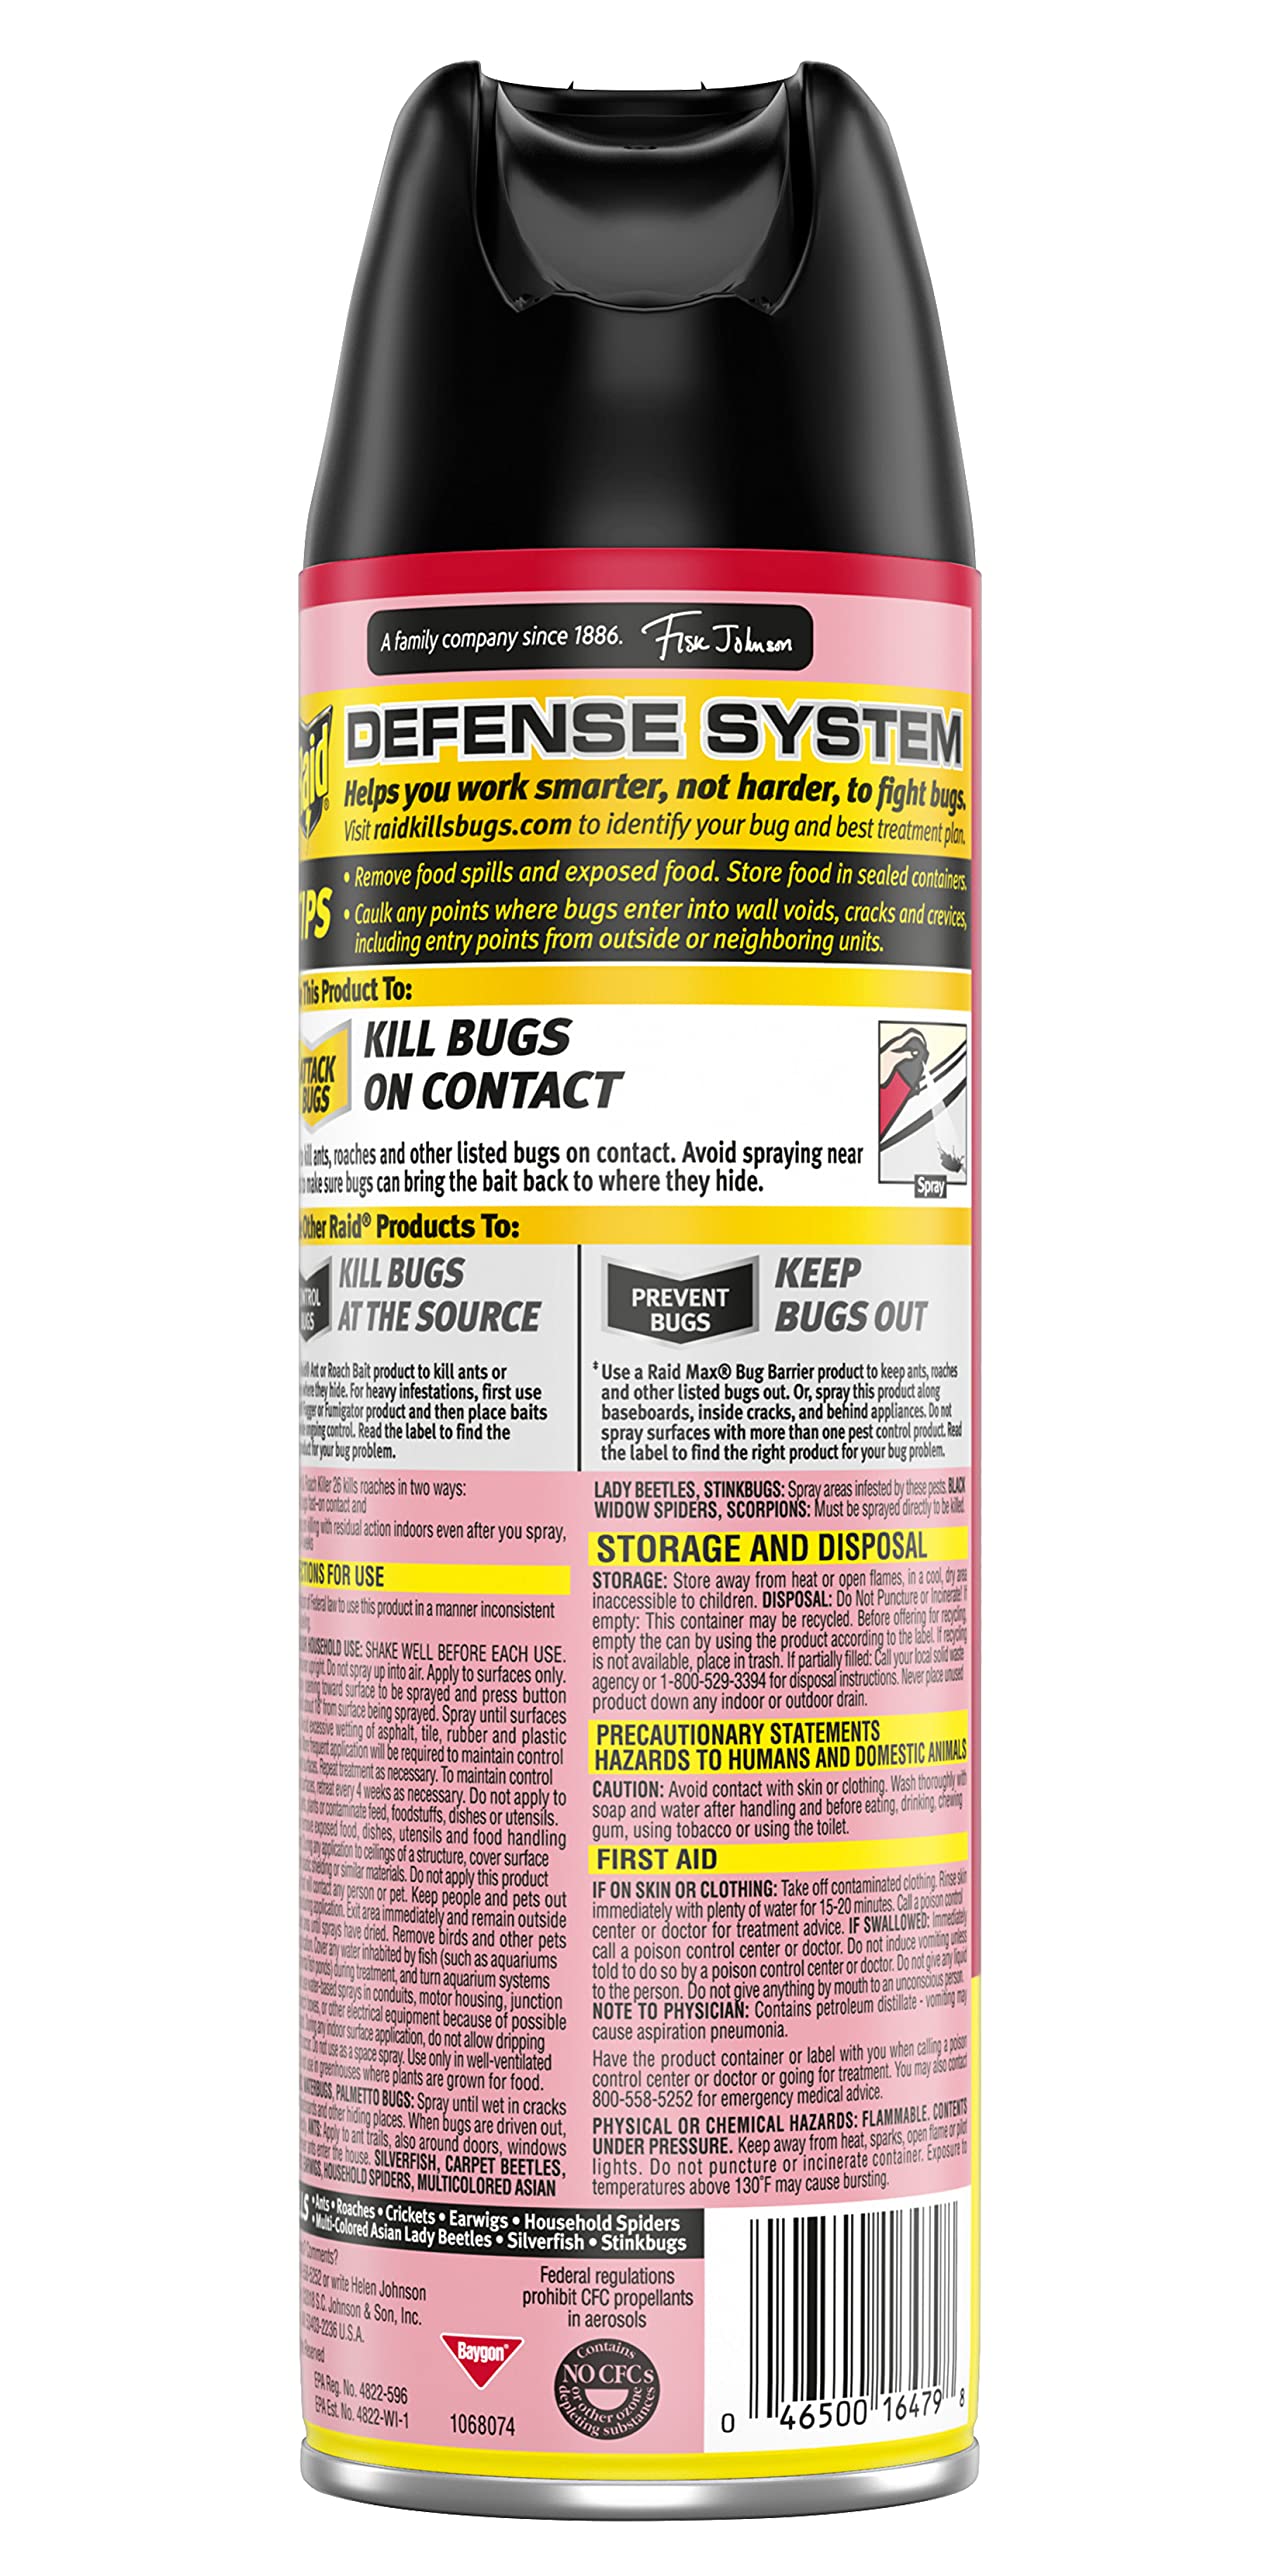 Raid Ant & Roach Spray Defense System, Lemon Scent, Attacks Bugs & Kills on Contact for up to 4 Weeks, No Lingering Chemical Odor, 17.5-Ounce (Pack of 5)